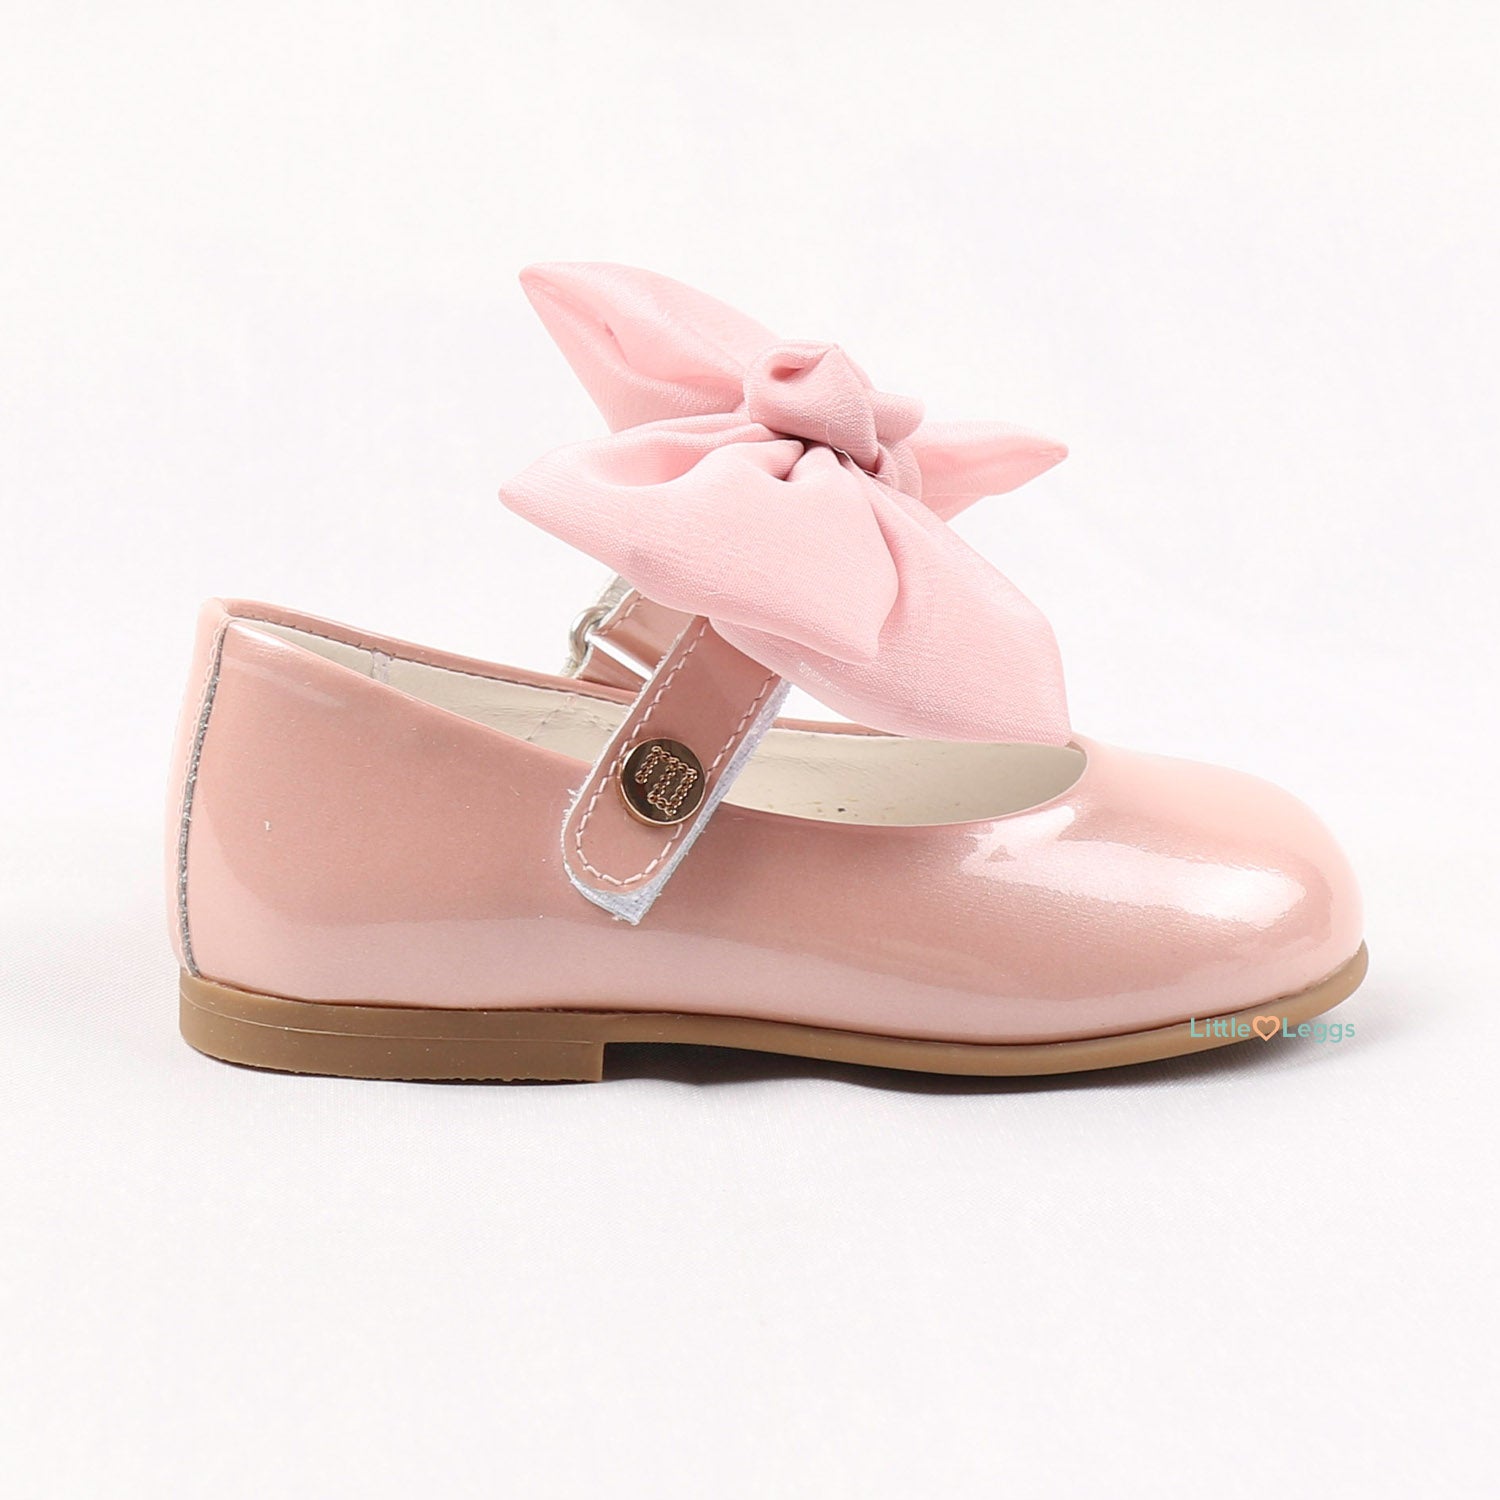 Dusty Pearl Pink Bow Mary Jane